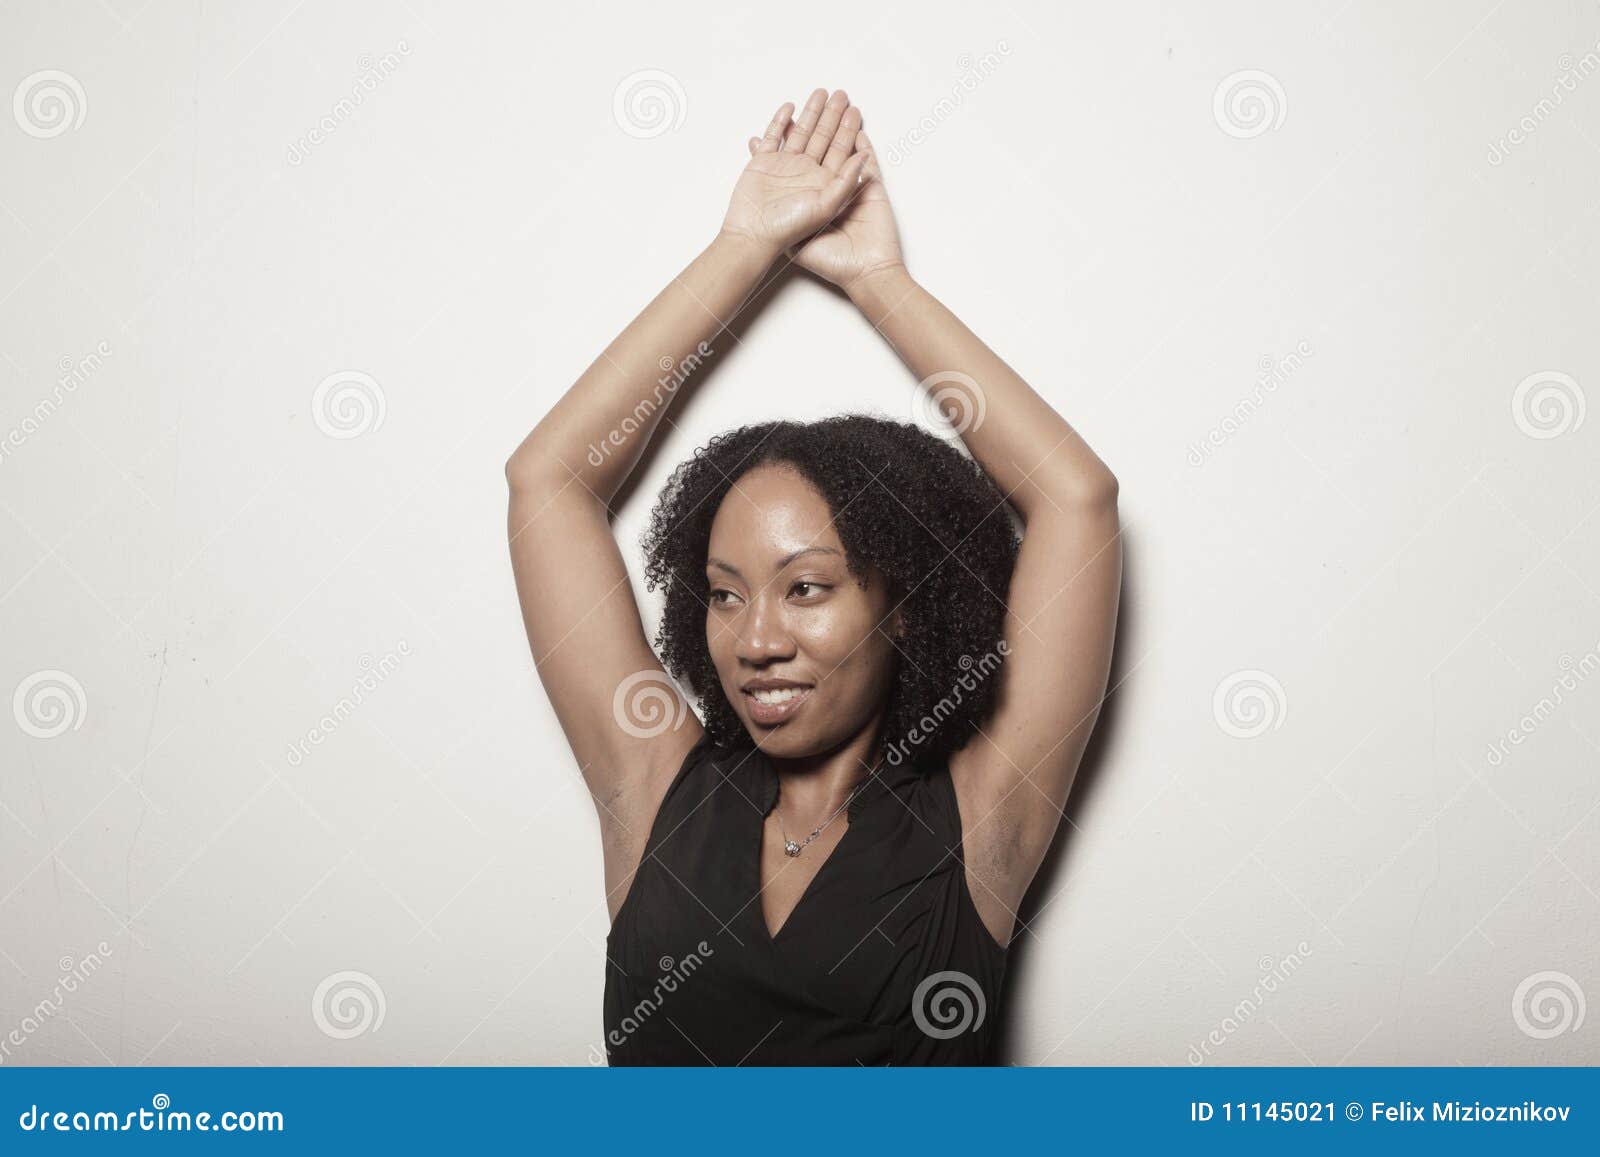 Woman Posing with Her Arms Above Her Head Stock Image - Image of